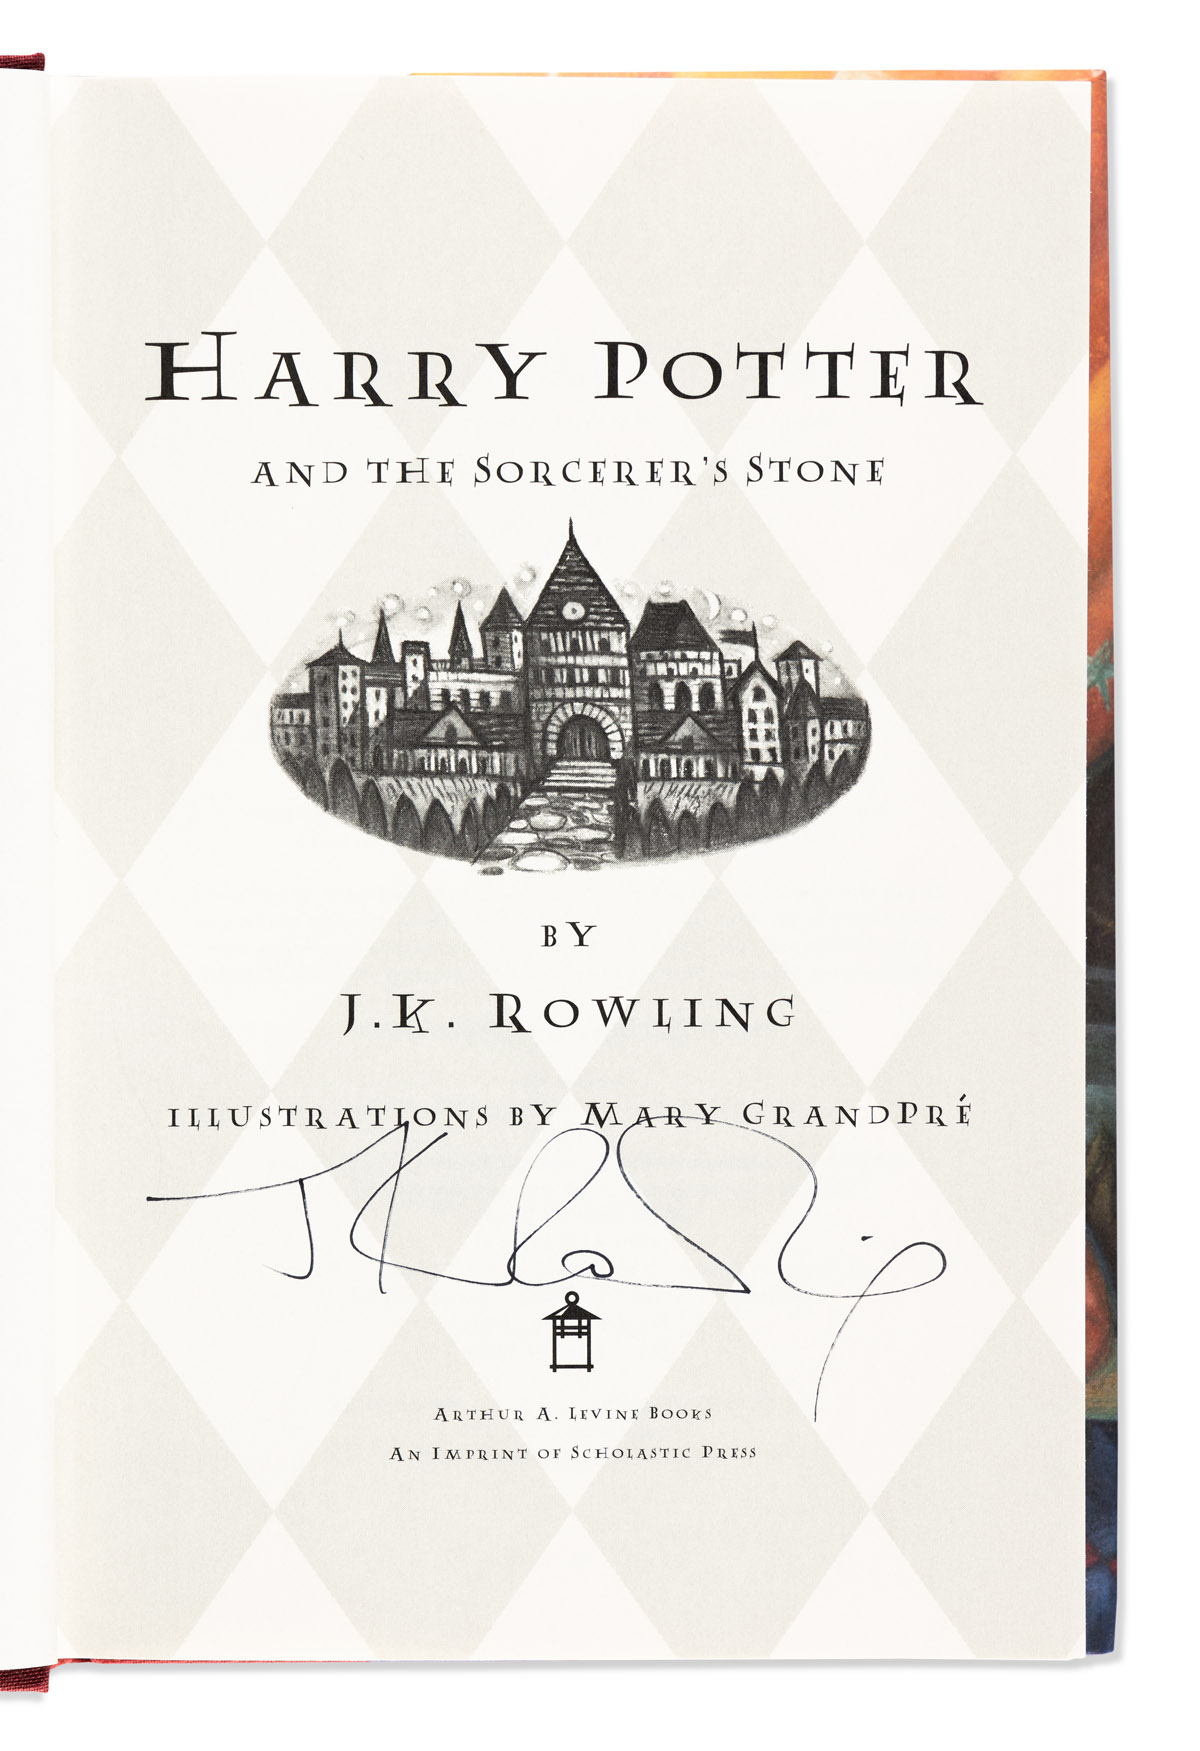 ROWLING, J.K. Harry Potter and the Sorcerers Stone. Signed on the title-page.